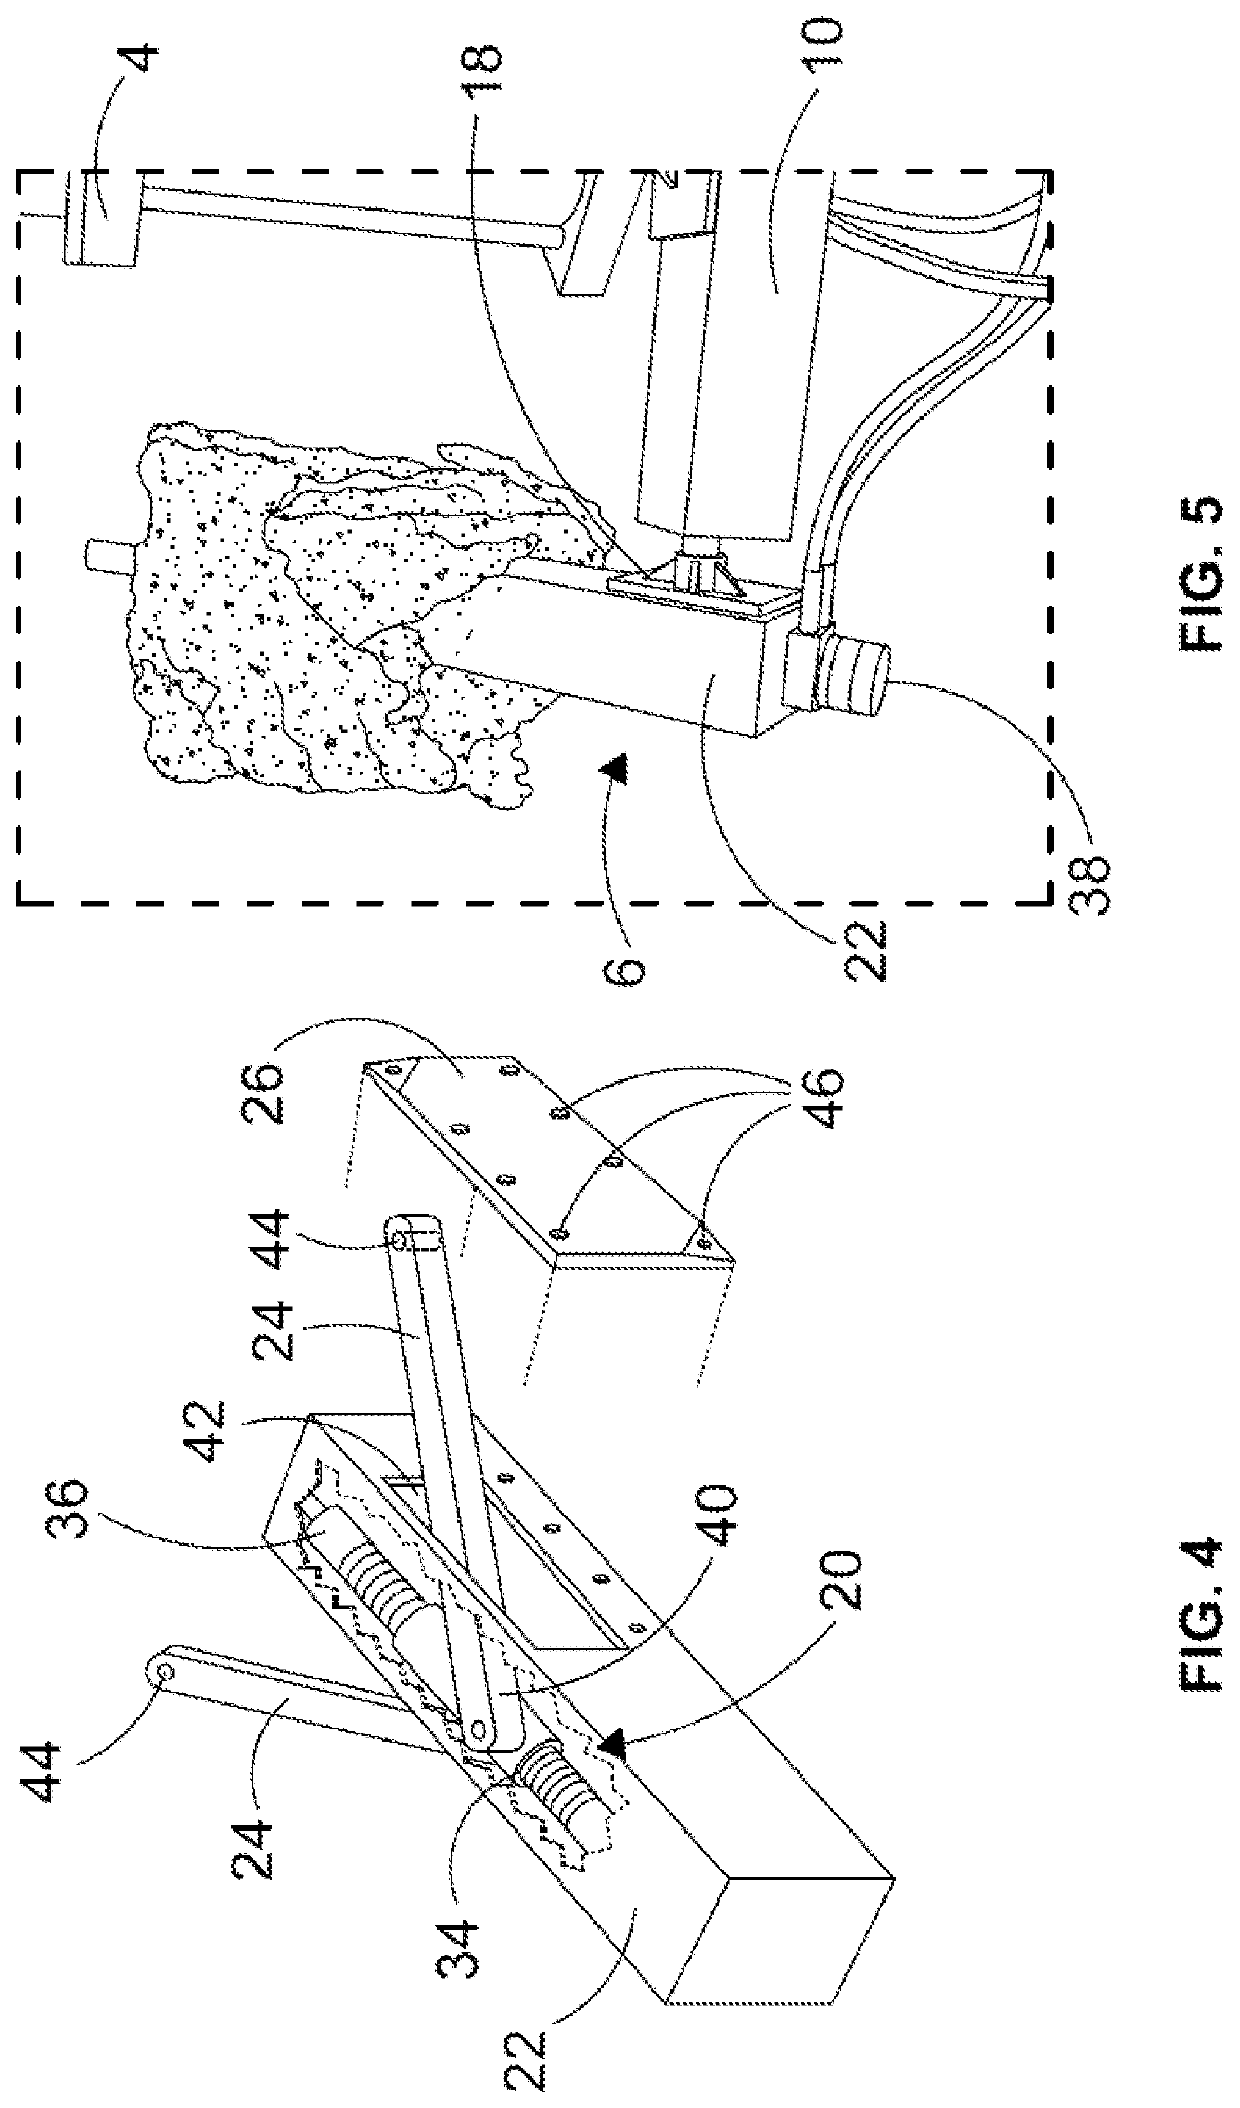 Apparatus for supporting and maneuvering an animal carcass